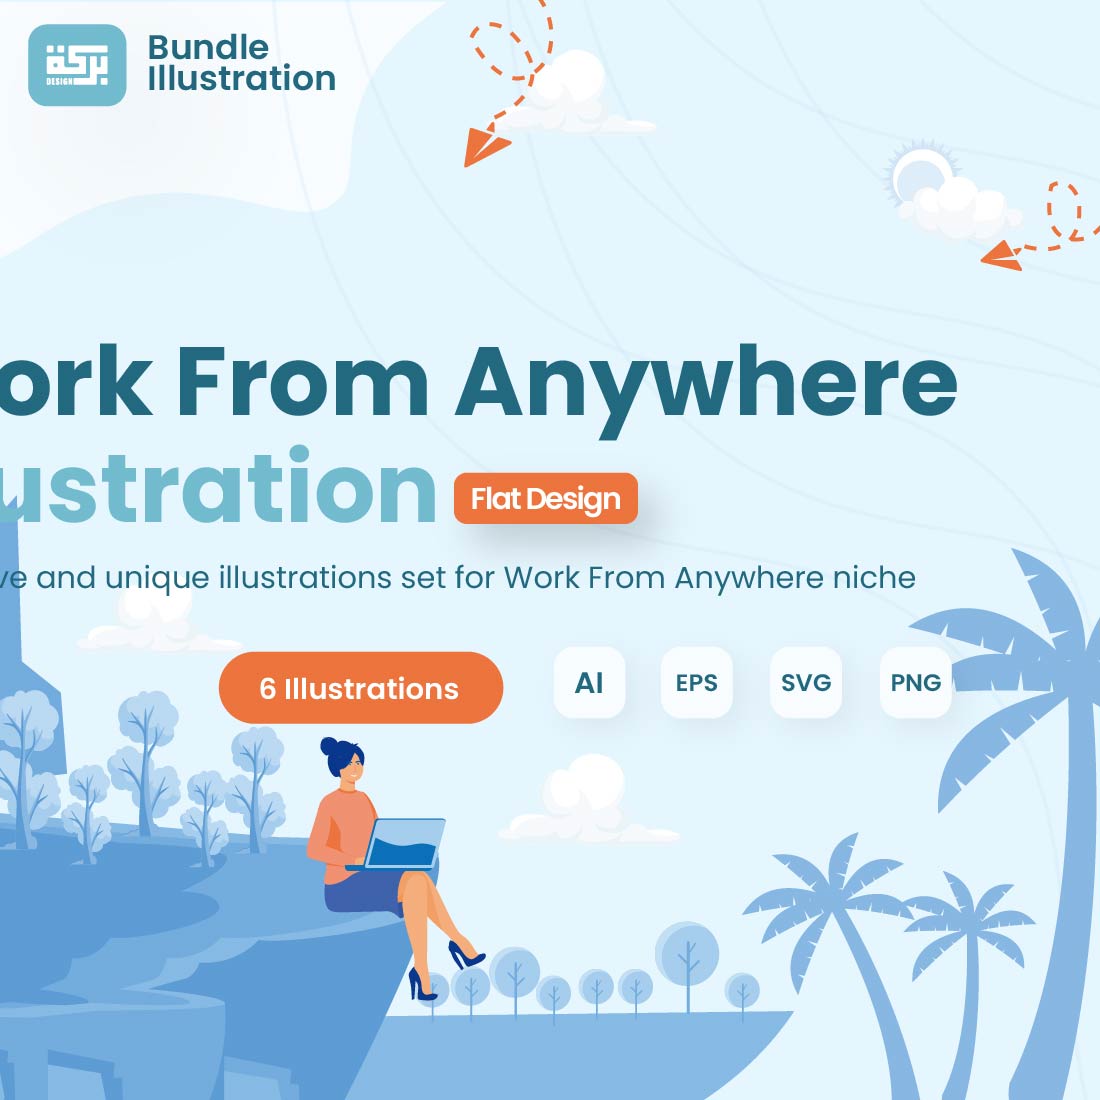 Work From Anywhere Illustration Design cover image.